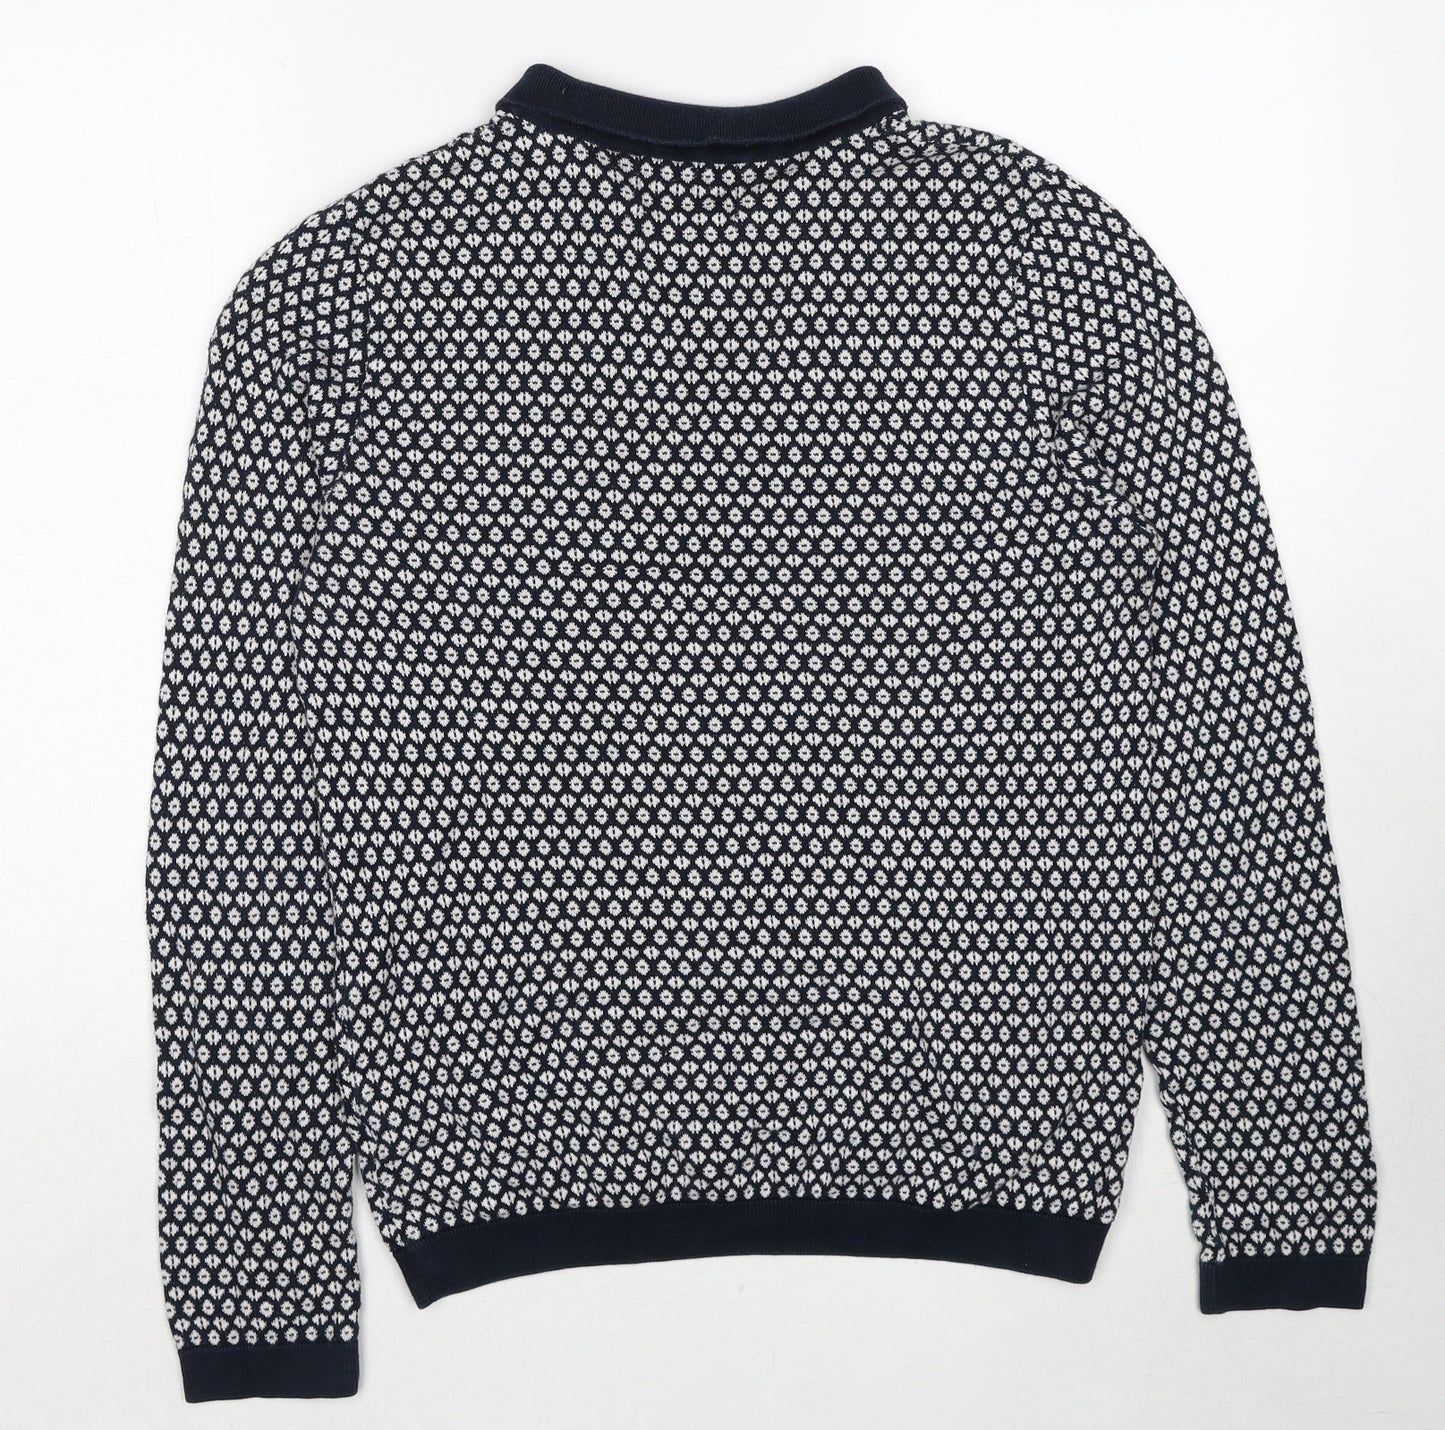 Topman Mens Black Collared Geometric Cotton Pullover Jumper Size S Long Sleeve